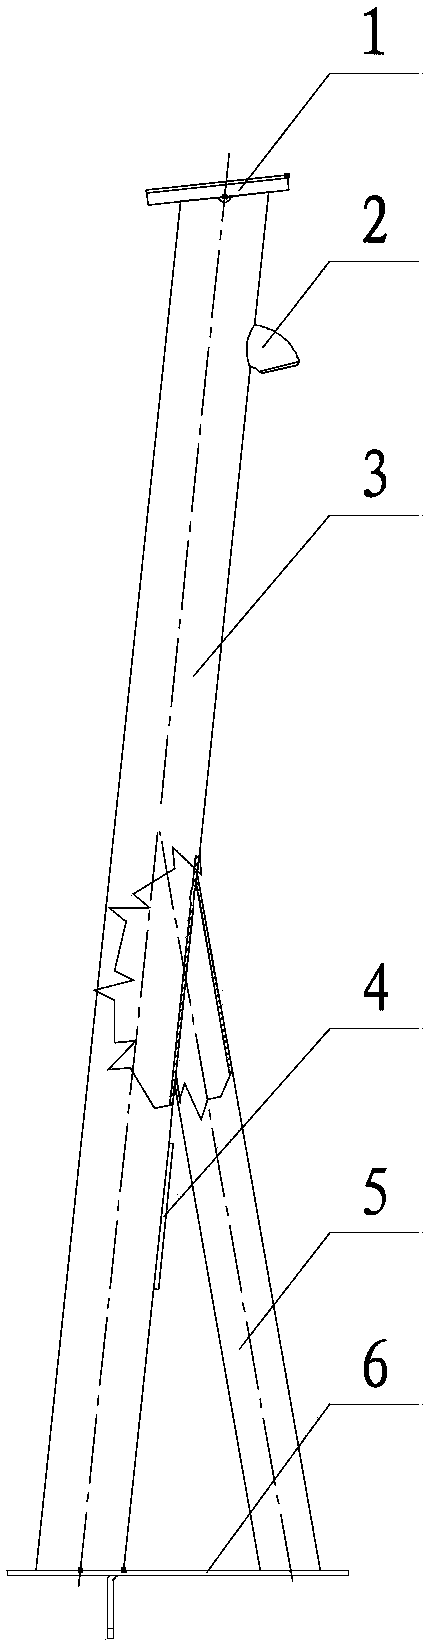 Anemoscope supporting device